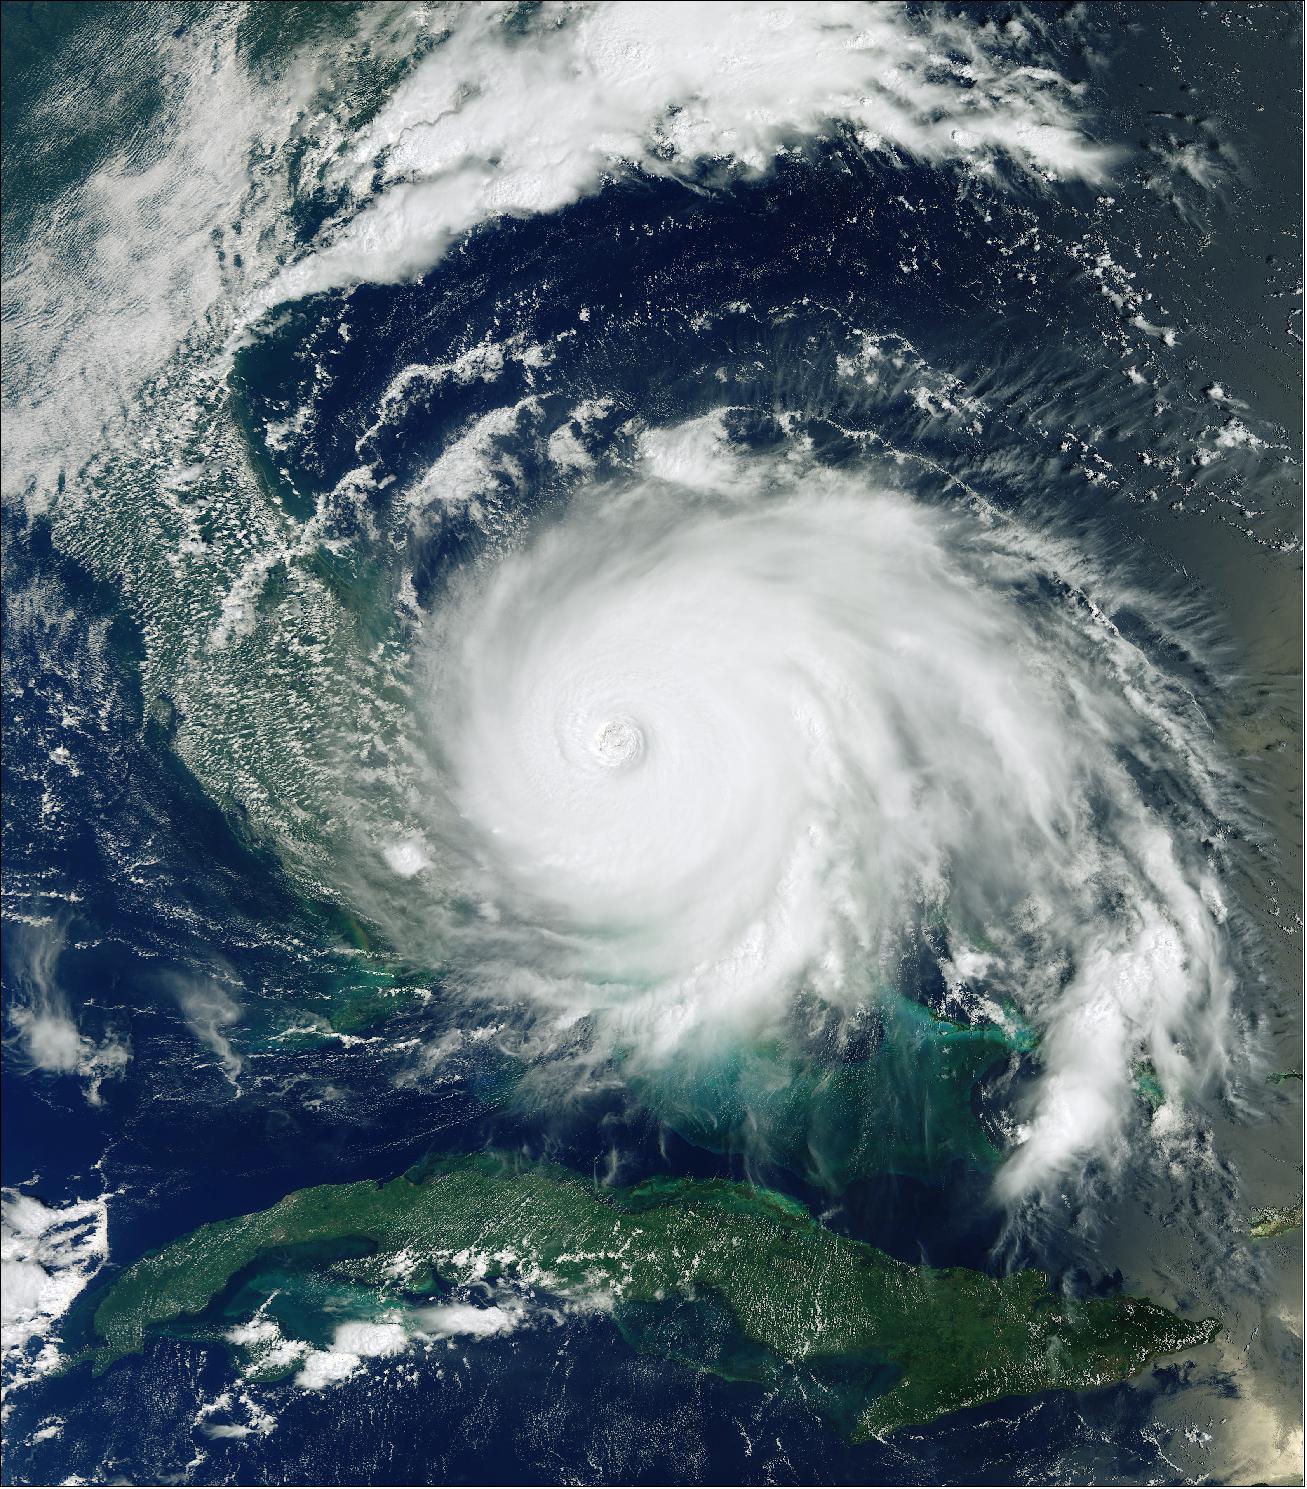 Figure 7: Copernicus Sentinel-3 image of Hurricane Dorian over the Bahamas on 2 September 2019 (image credit: ESA, the image contains modified Copernicus Sentinel data (2019), processed by ESA)